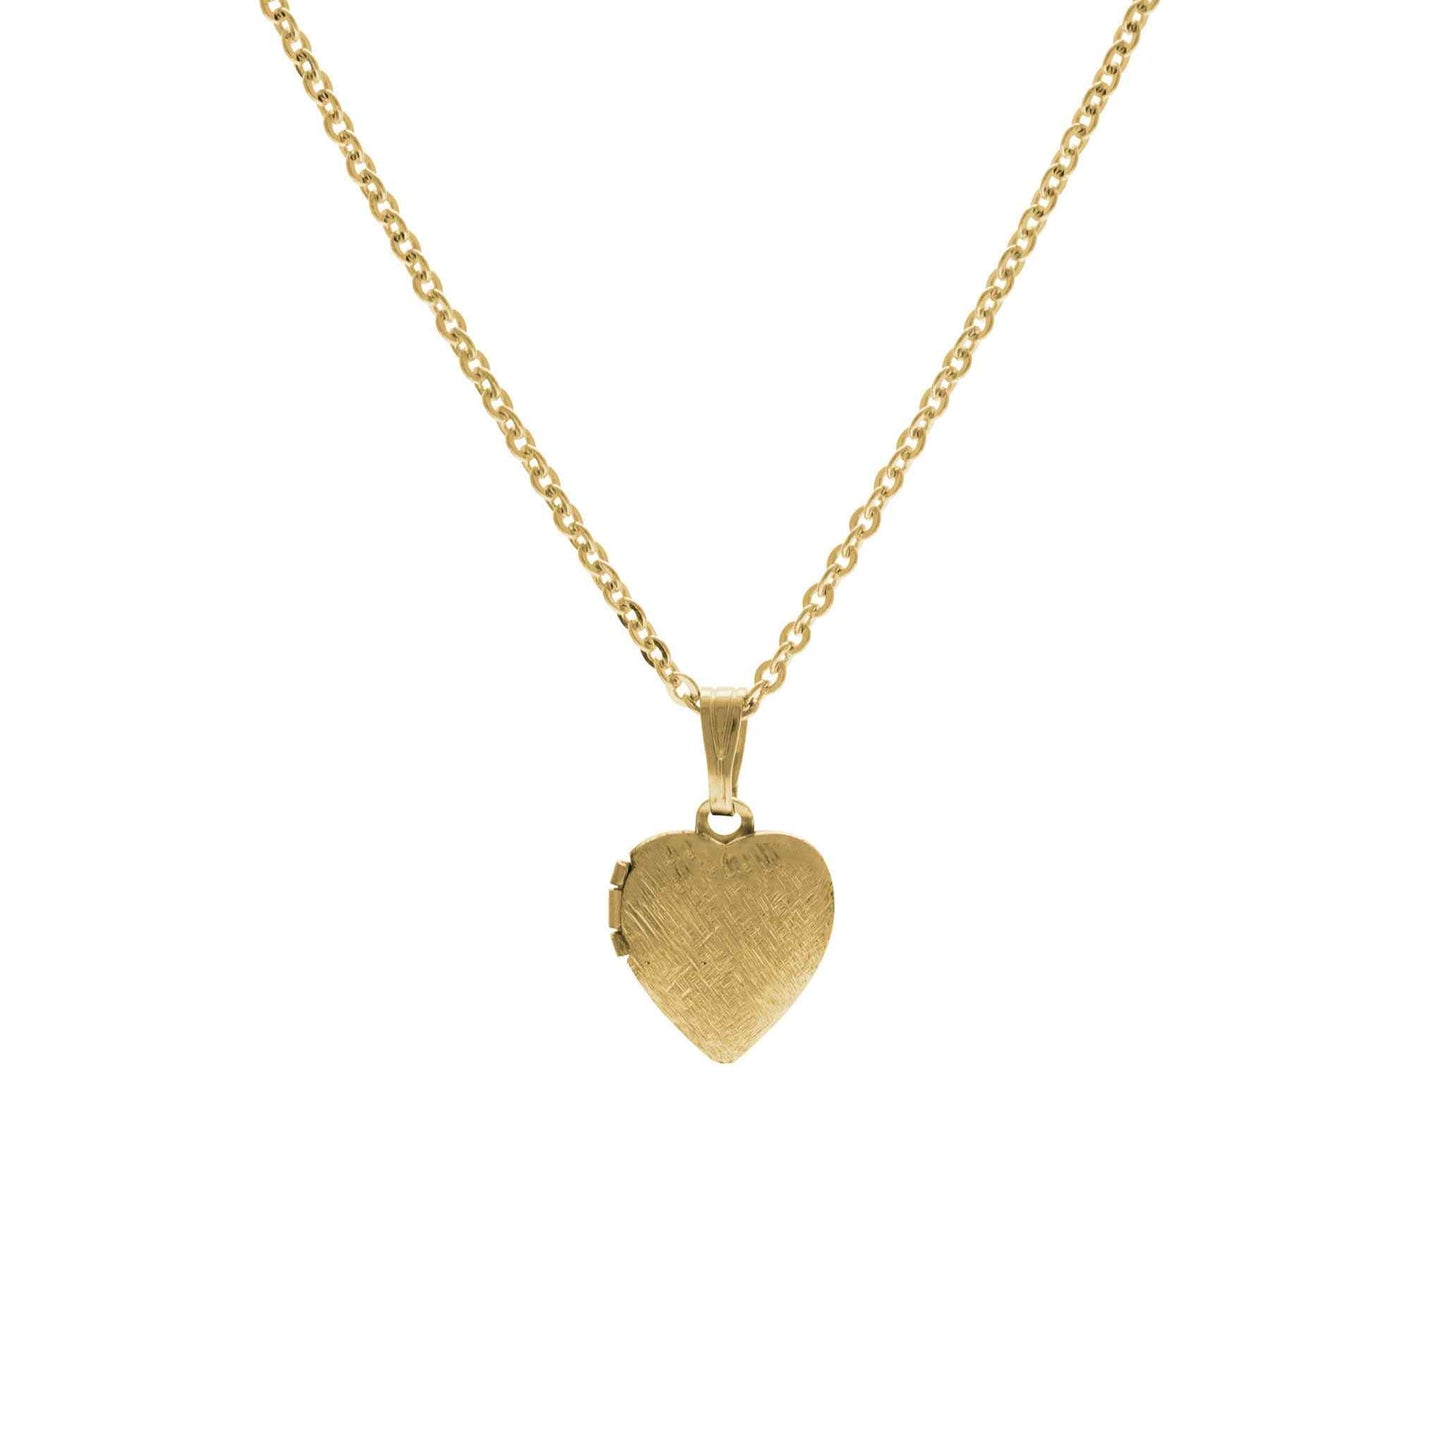 A heart locket necklace displayed on a neutral white background.